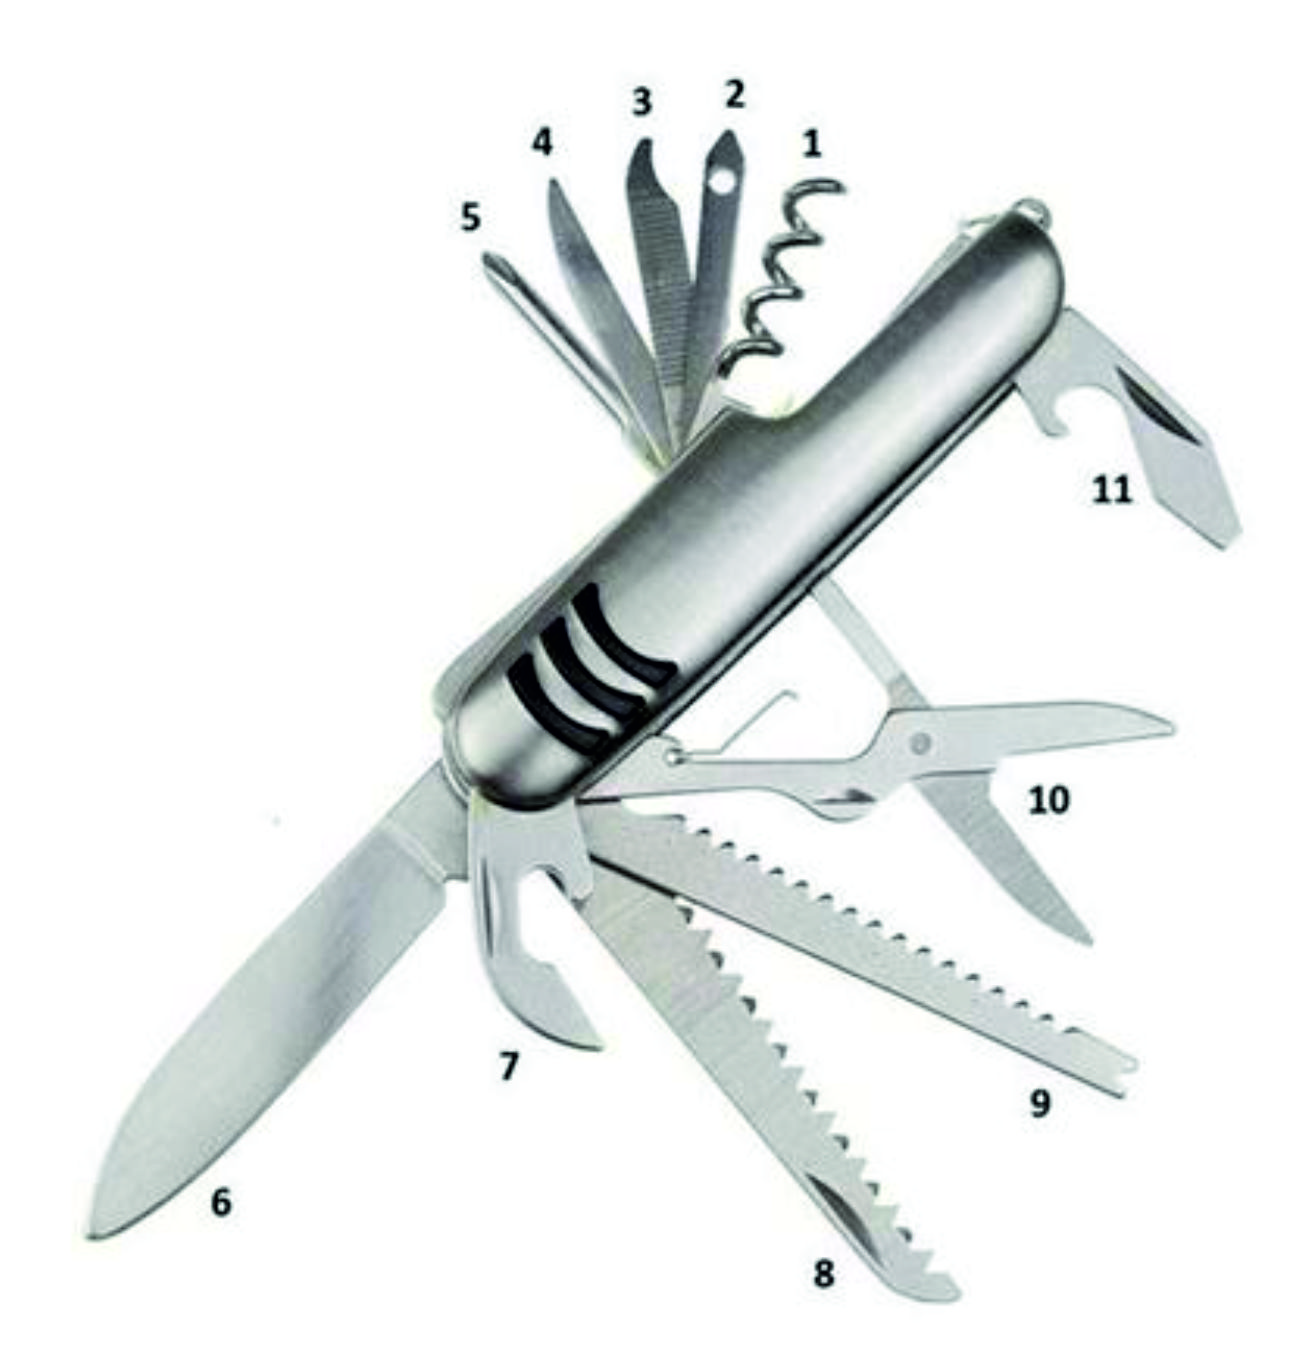 Knife sets and versatile tools (2)